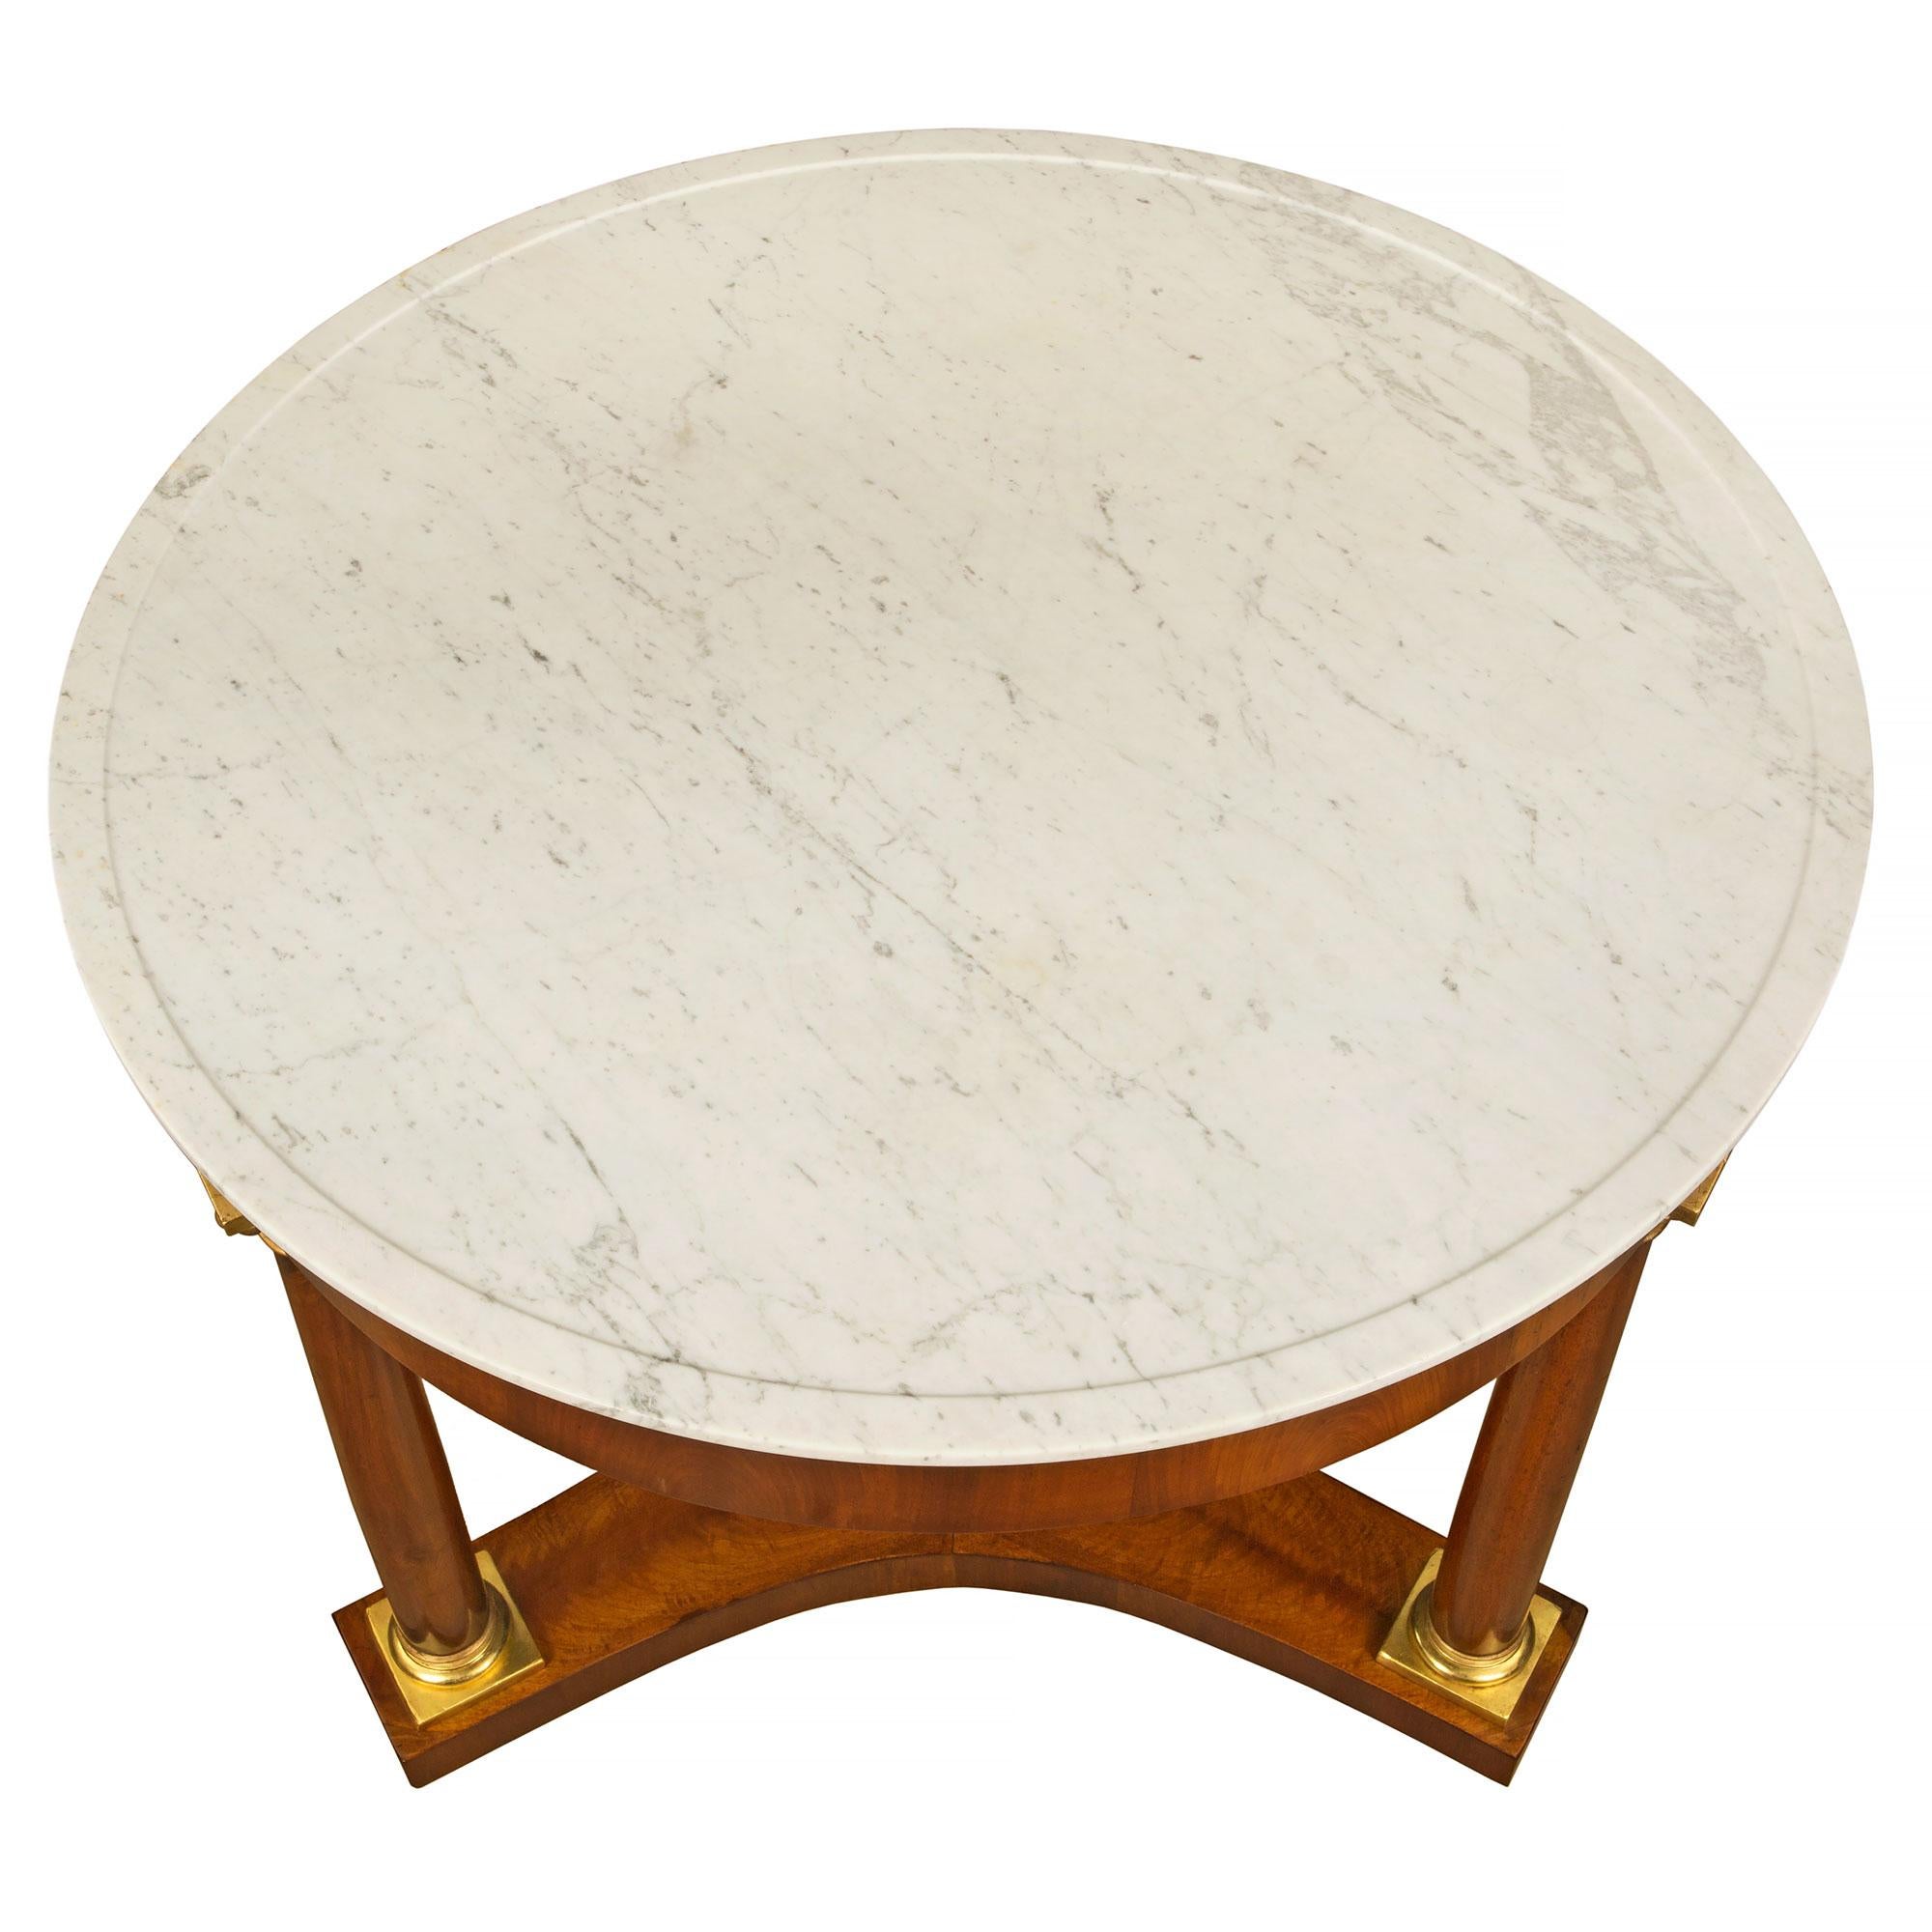 A very handsome Italian 19th century Neo-Classical st. walnut, giltwood and marble circular center table from Luca. The table is raised on three bun feet below the concave sides stretcher. Above are three column supports with a giltwood base and